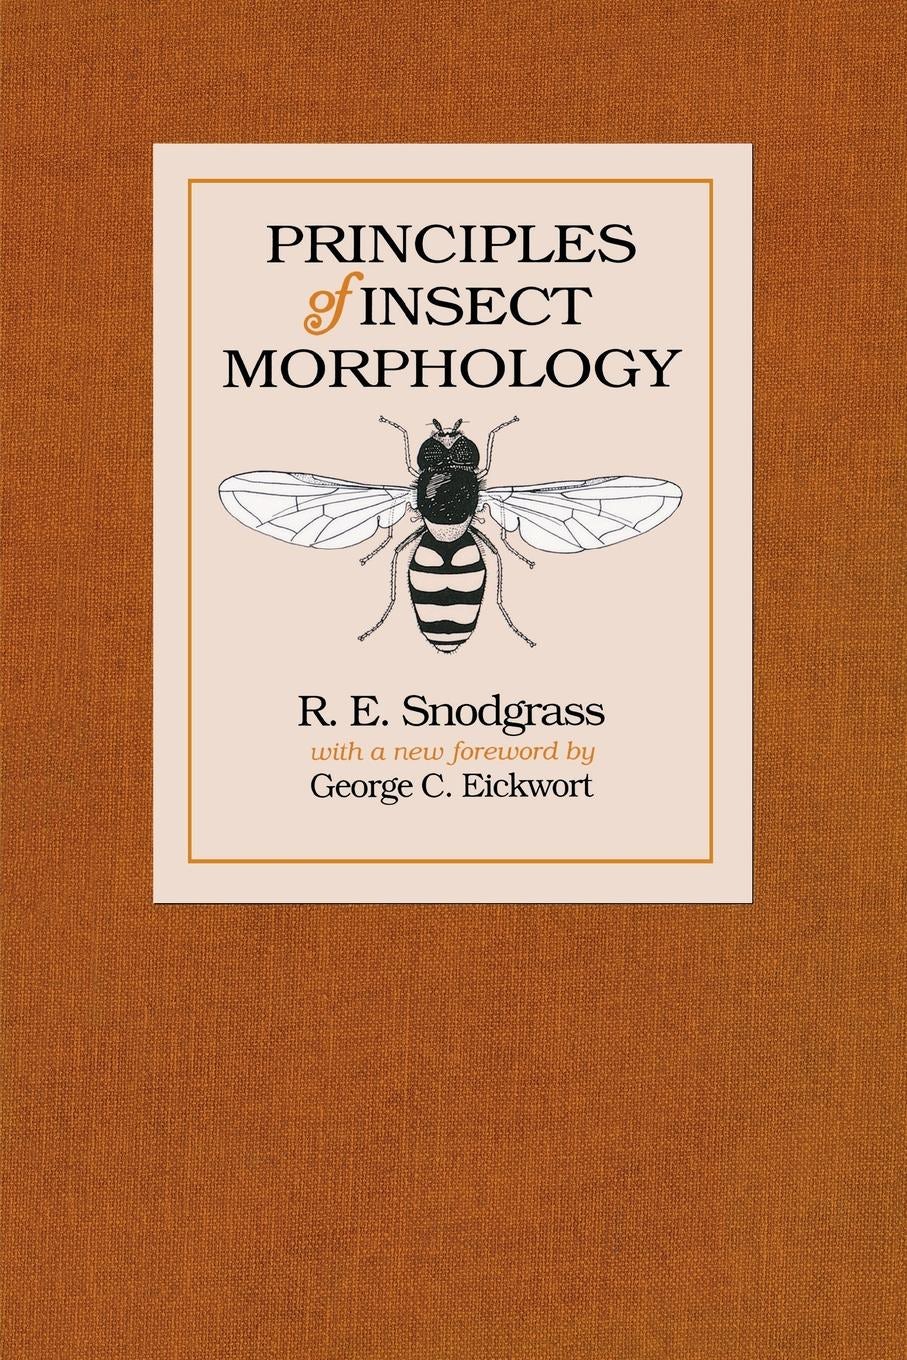 Principles of Insect Morphology by R. E. Snodgrass,Foreword by 